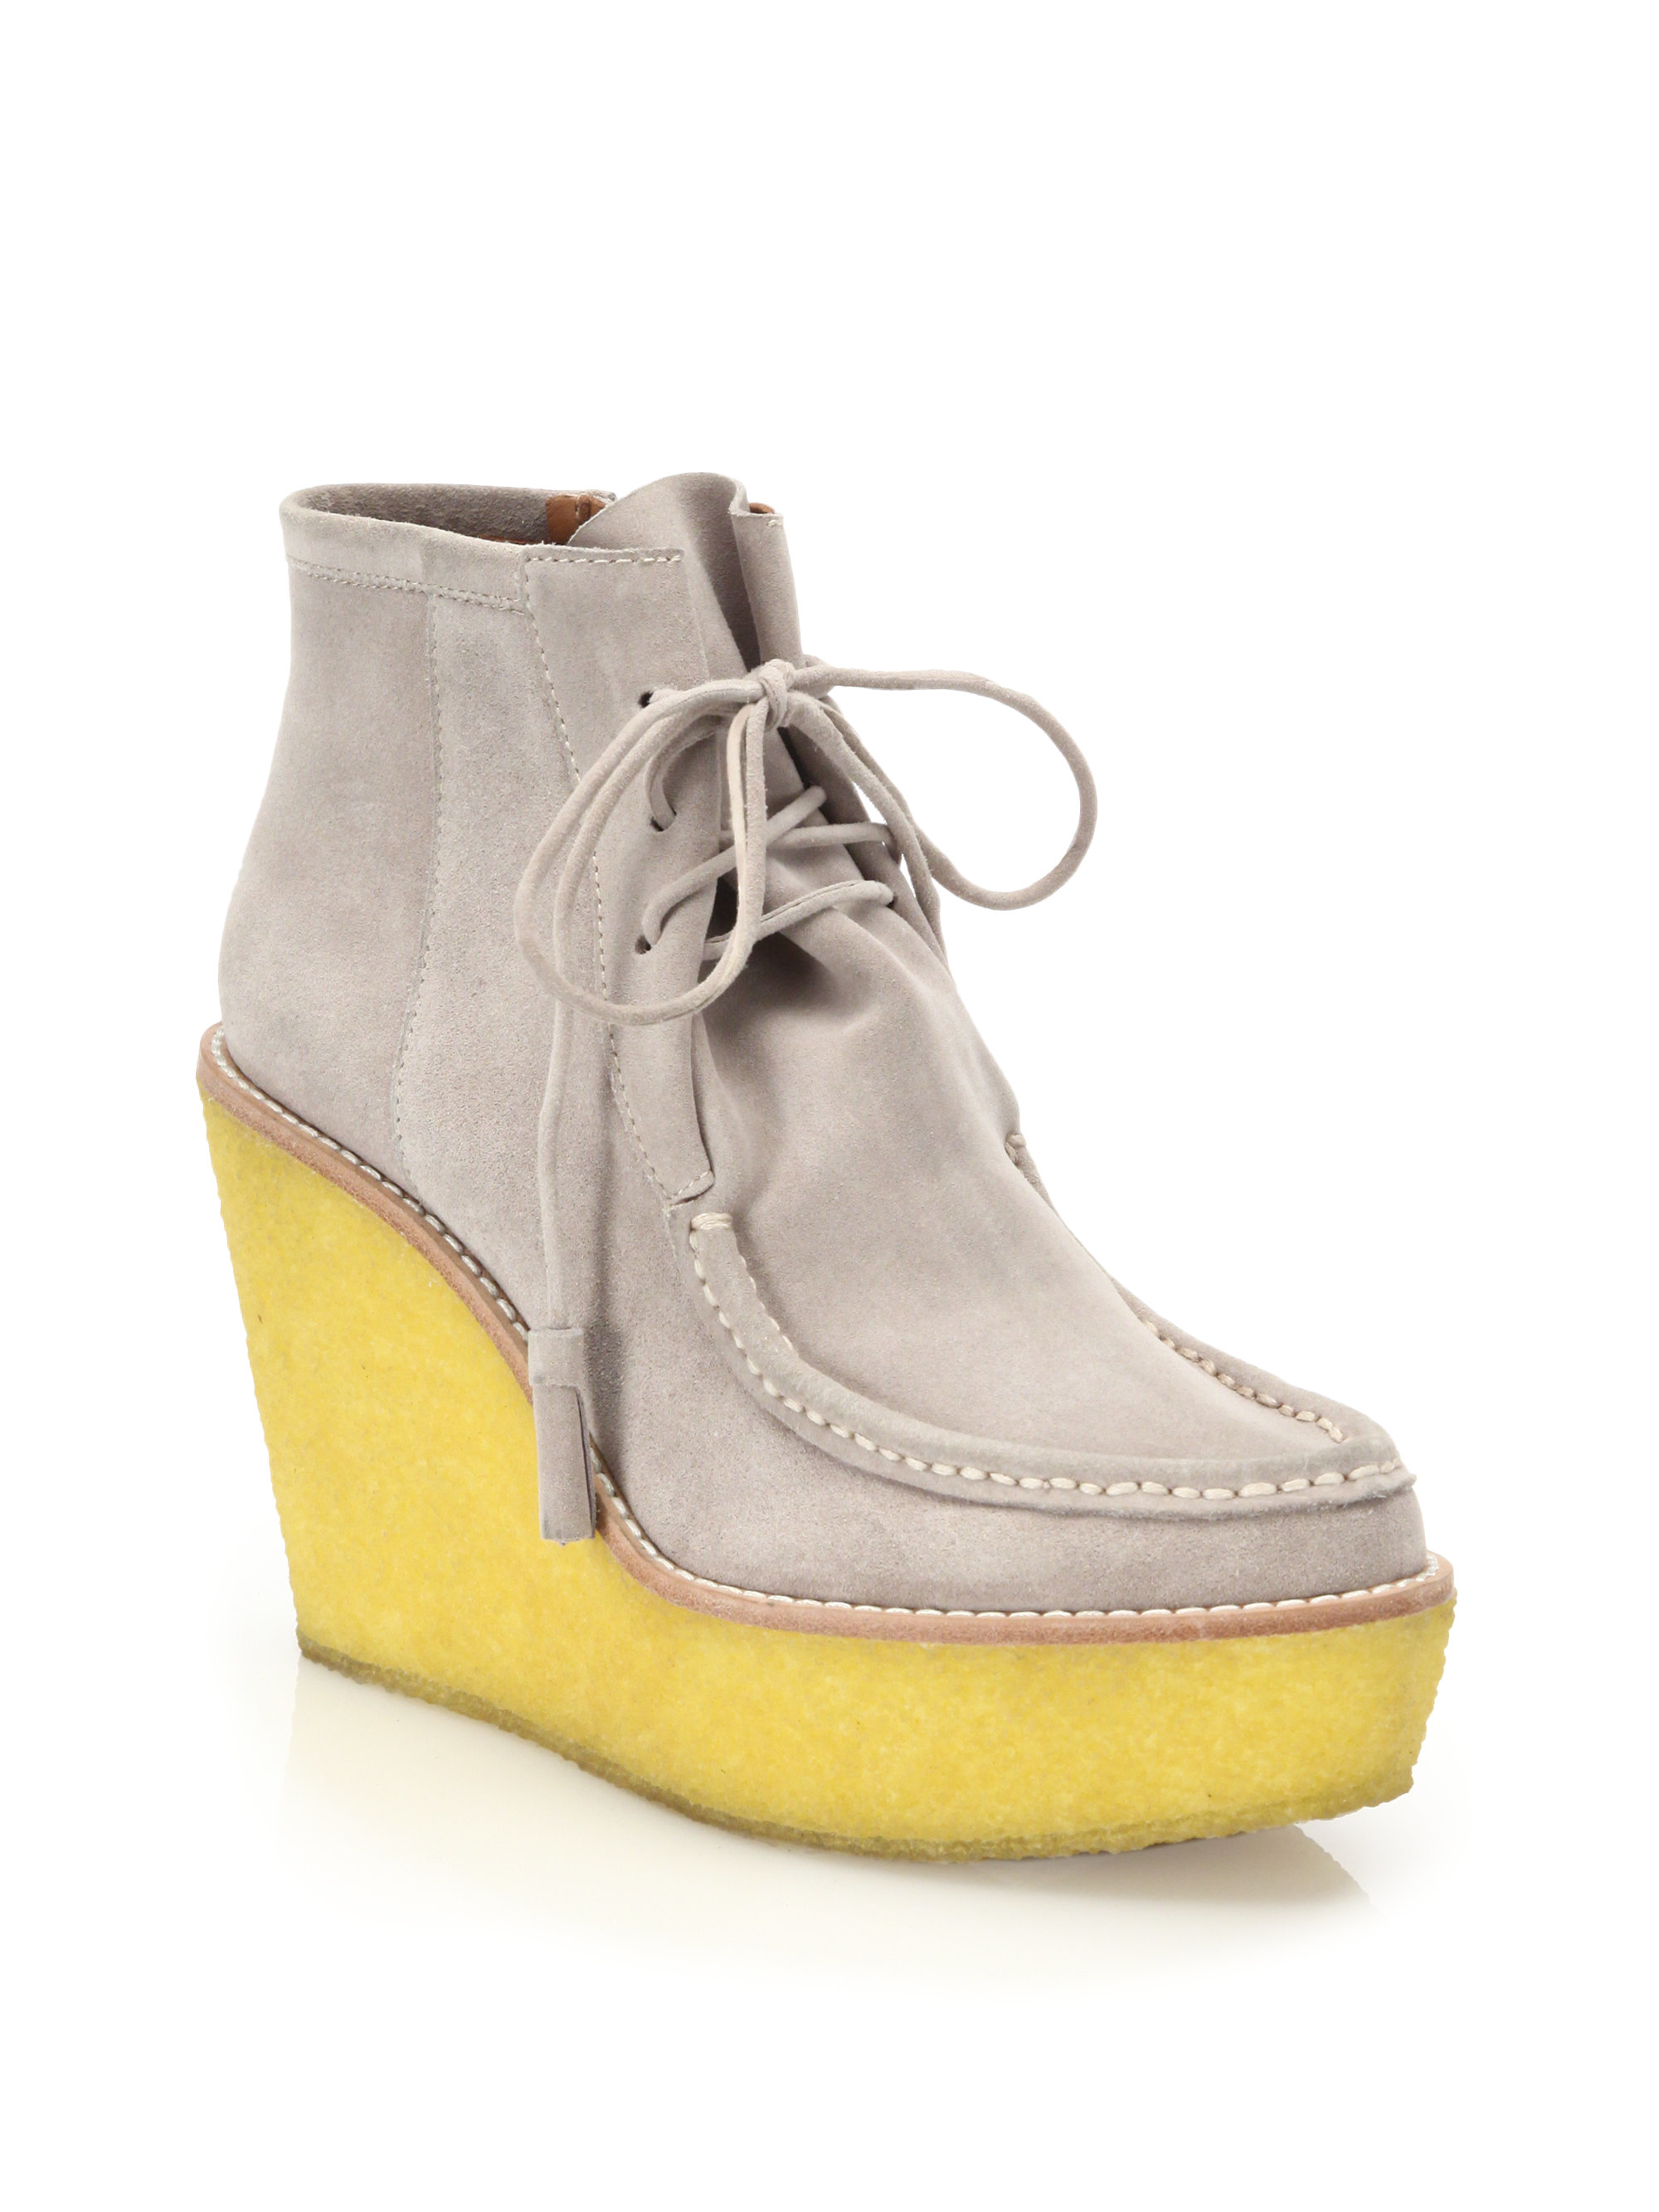 Buy > moccasin wedge boots > in stock